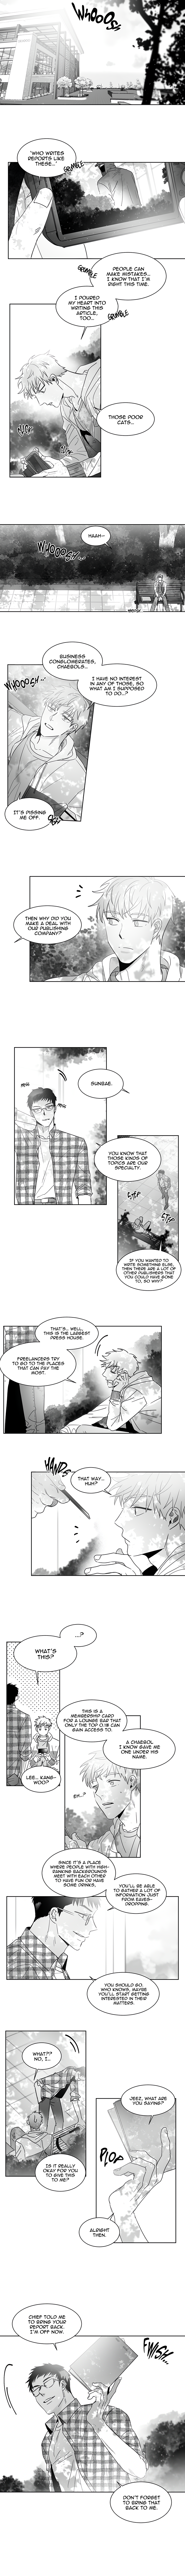 Unromantic Chapter 1 - Page 2